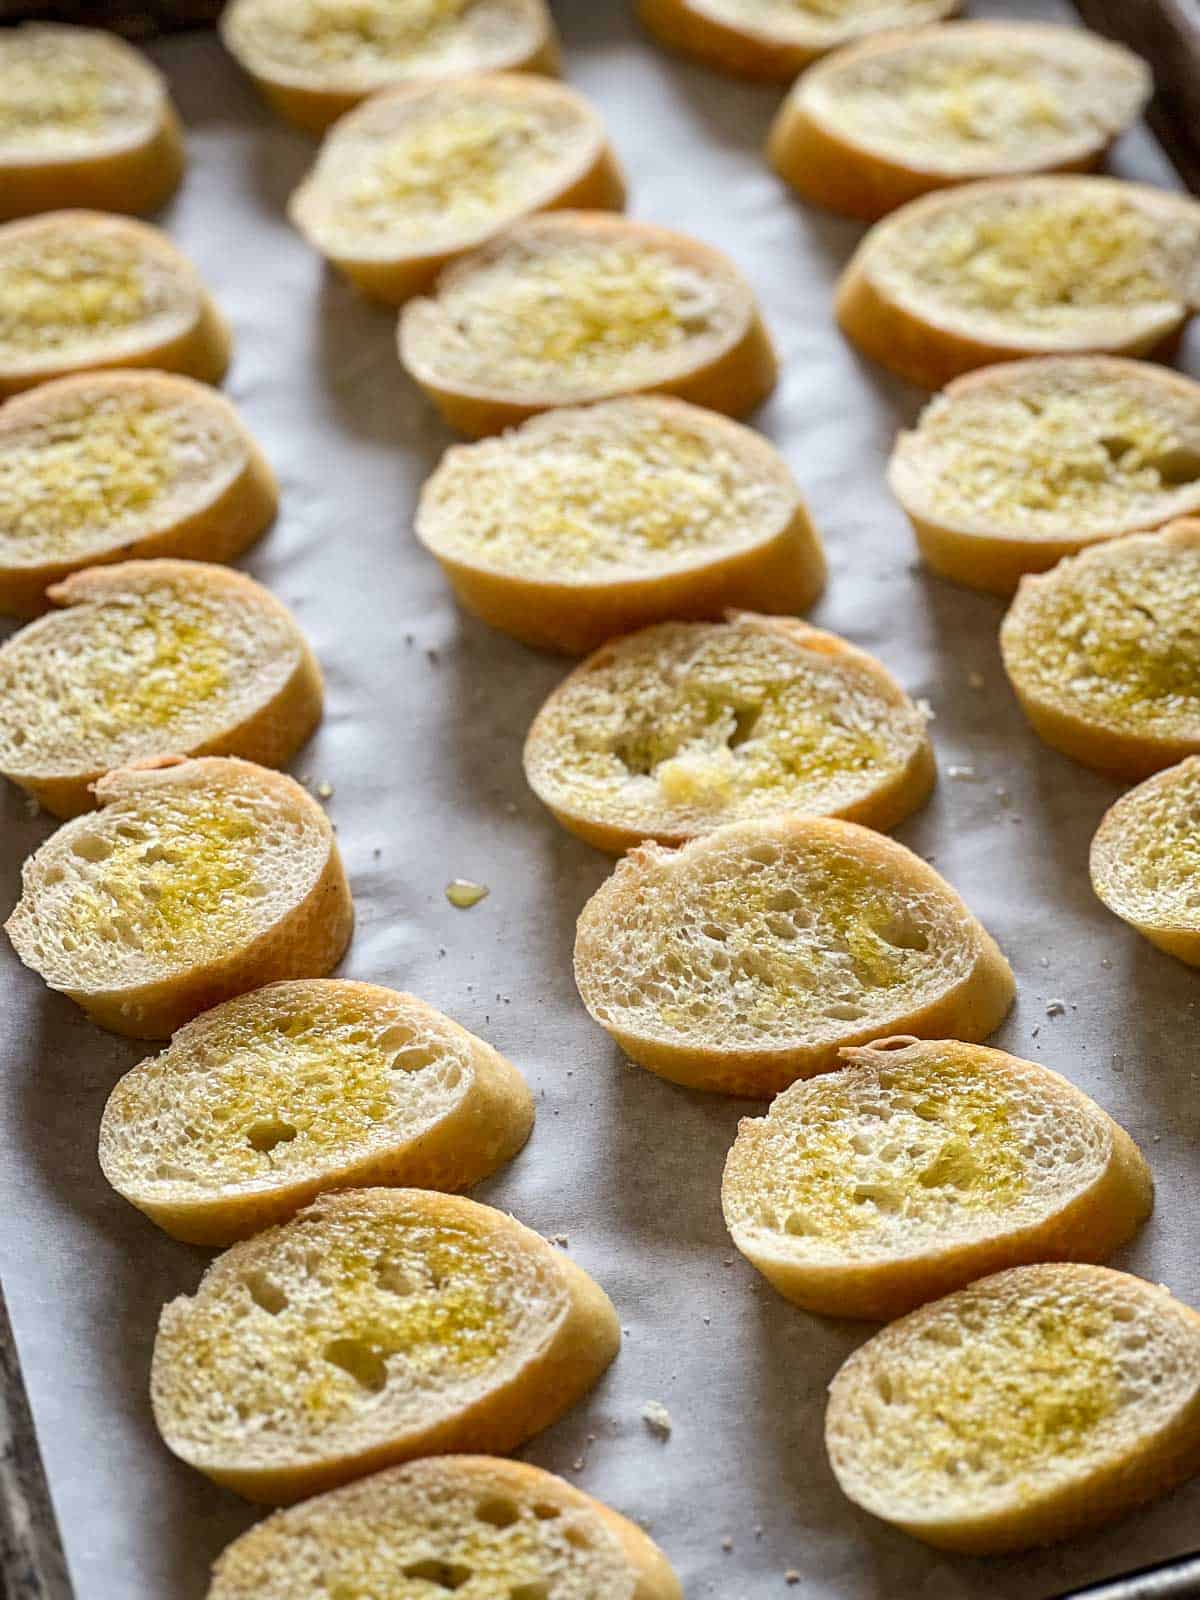 Thin slices of baguette topped with olive oil on a sheet pan ready for the oven.